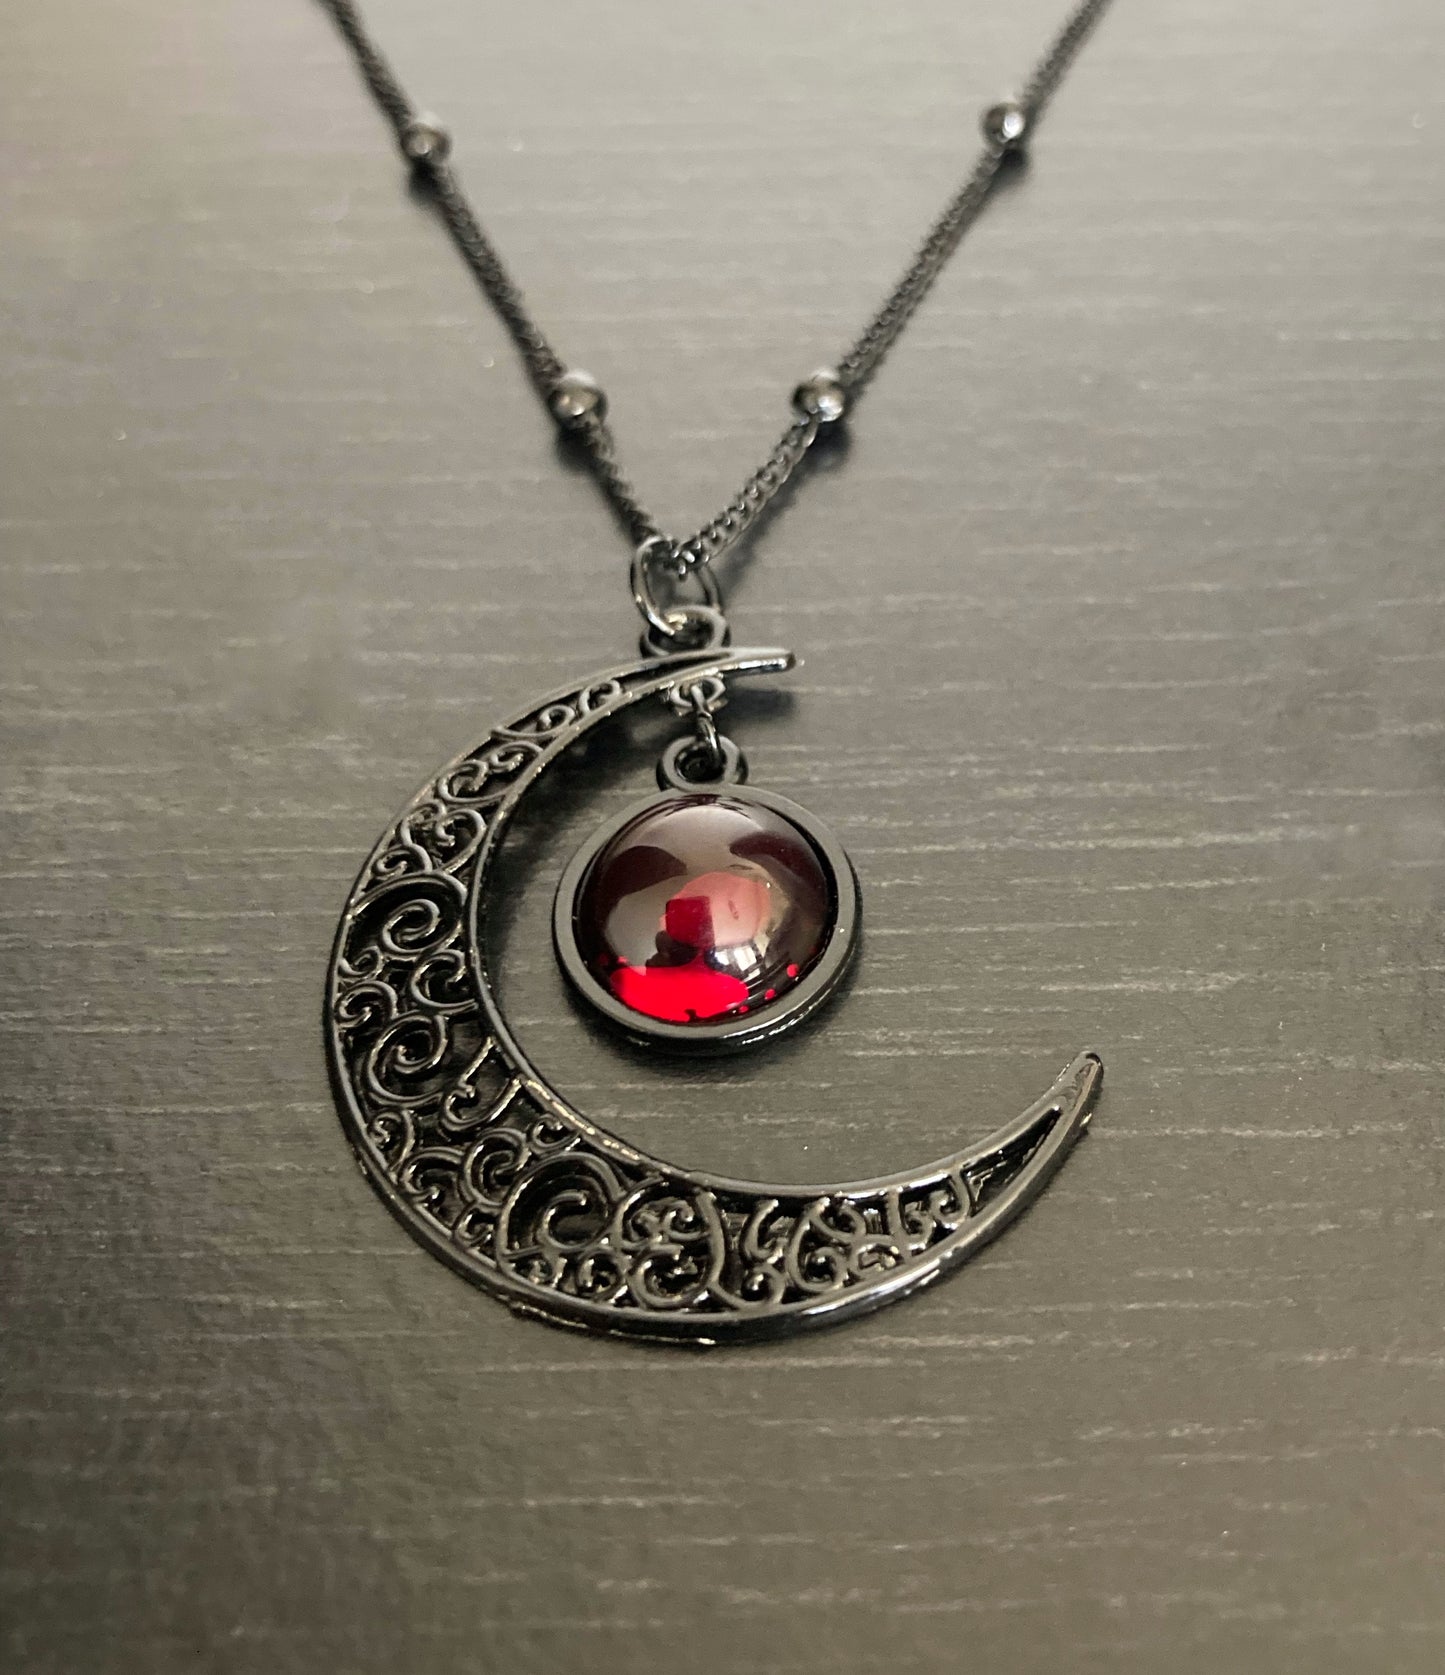 A red glass circle is hanging into the curve of a crescent moon necklace. The chain is thin with solid small ball shapes dotted along it. The moon and chain are black in colour and a lightweight stainless steel.